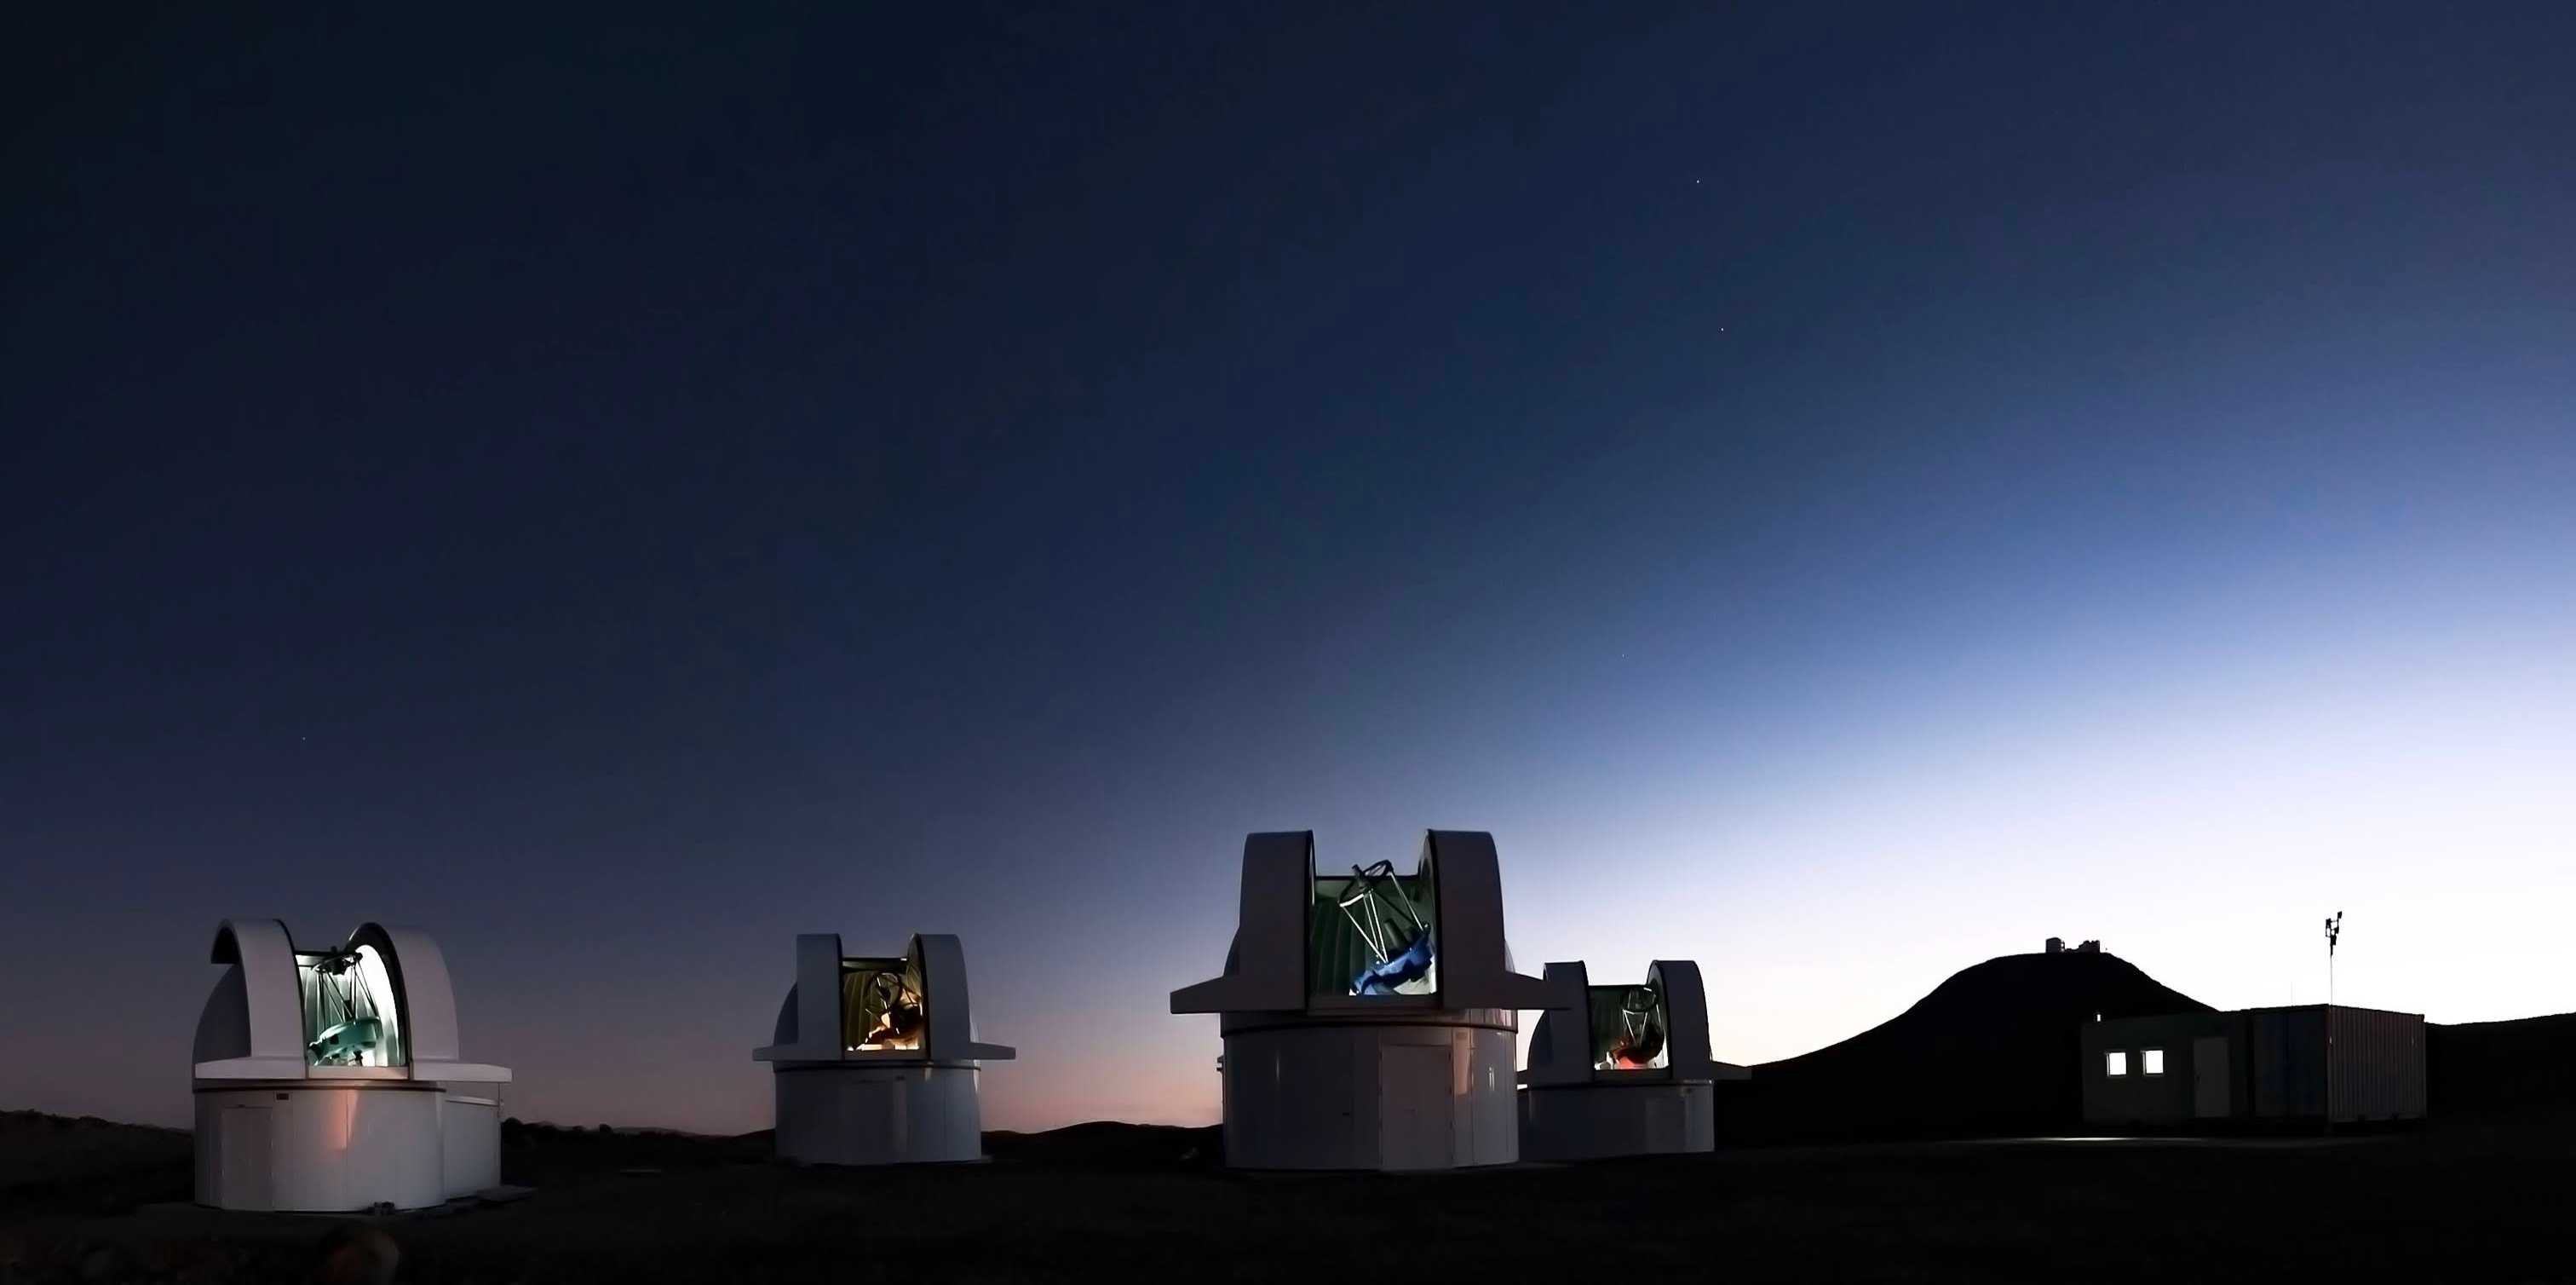 Enlarged view: Speculoos telescopes in the dawn